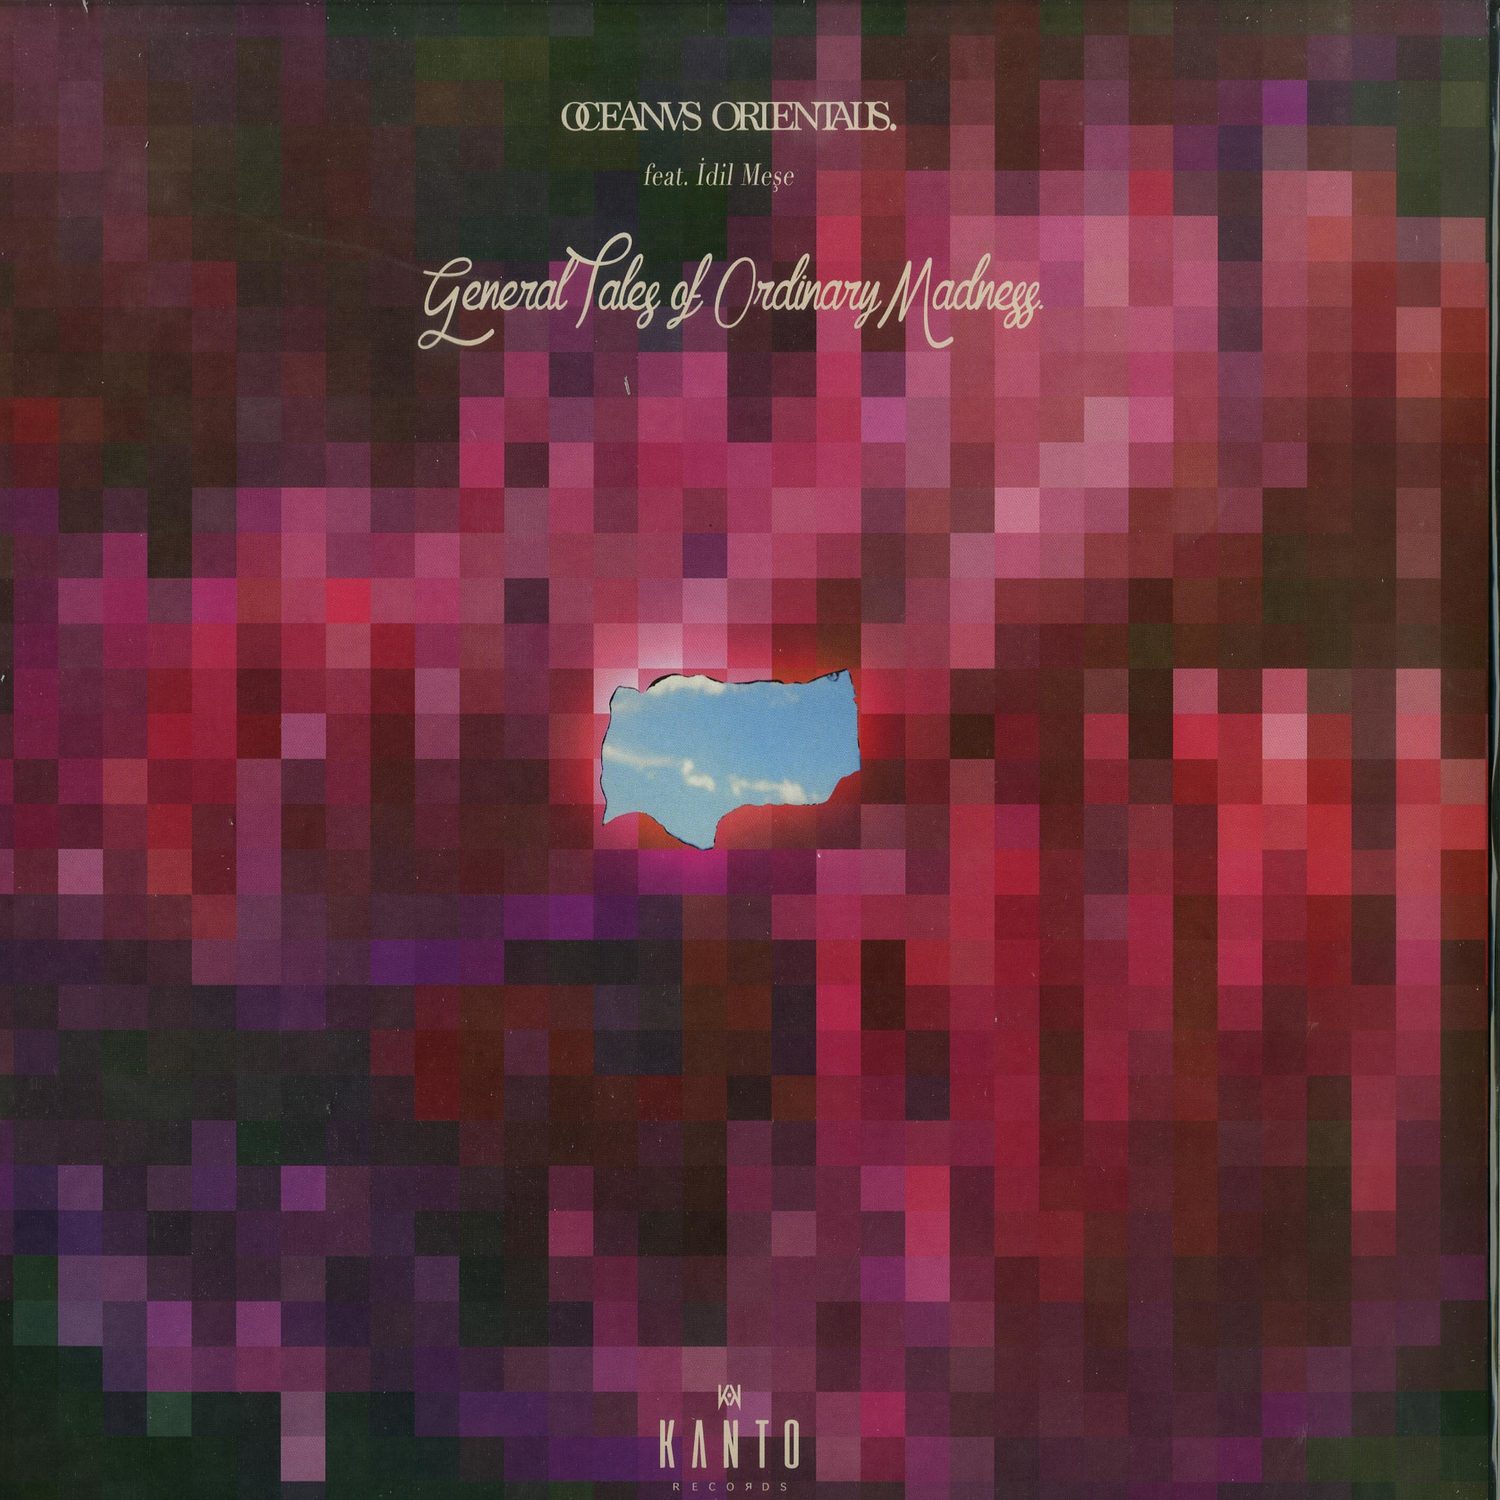 Oceanvs Orientalis feat. Idil Mese - GENERAL TALES OF ORDINARY MADNESS